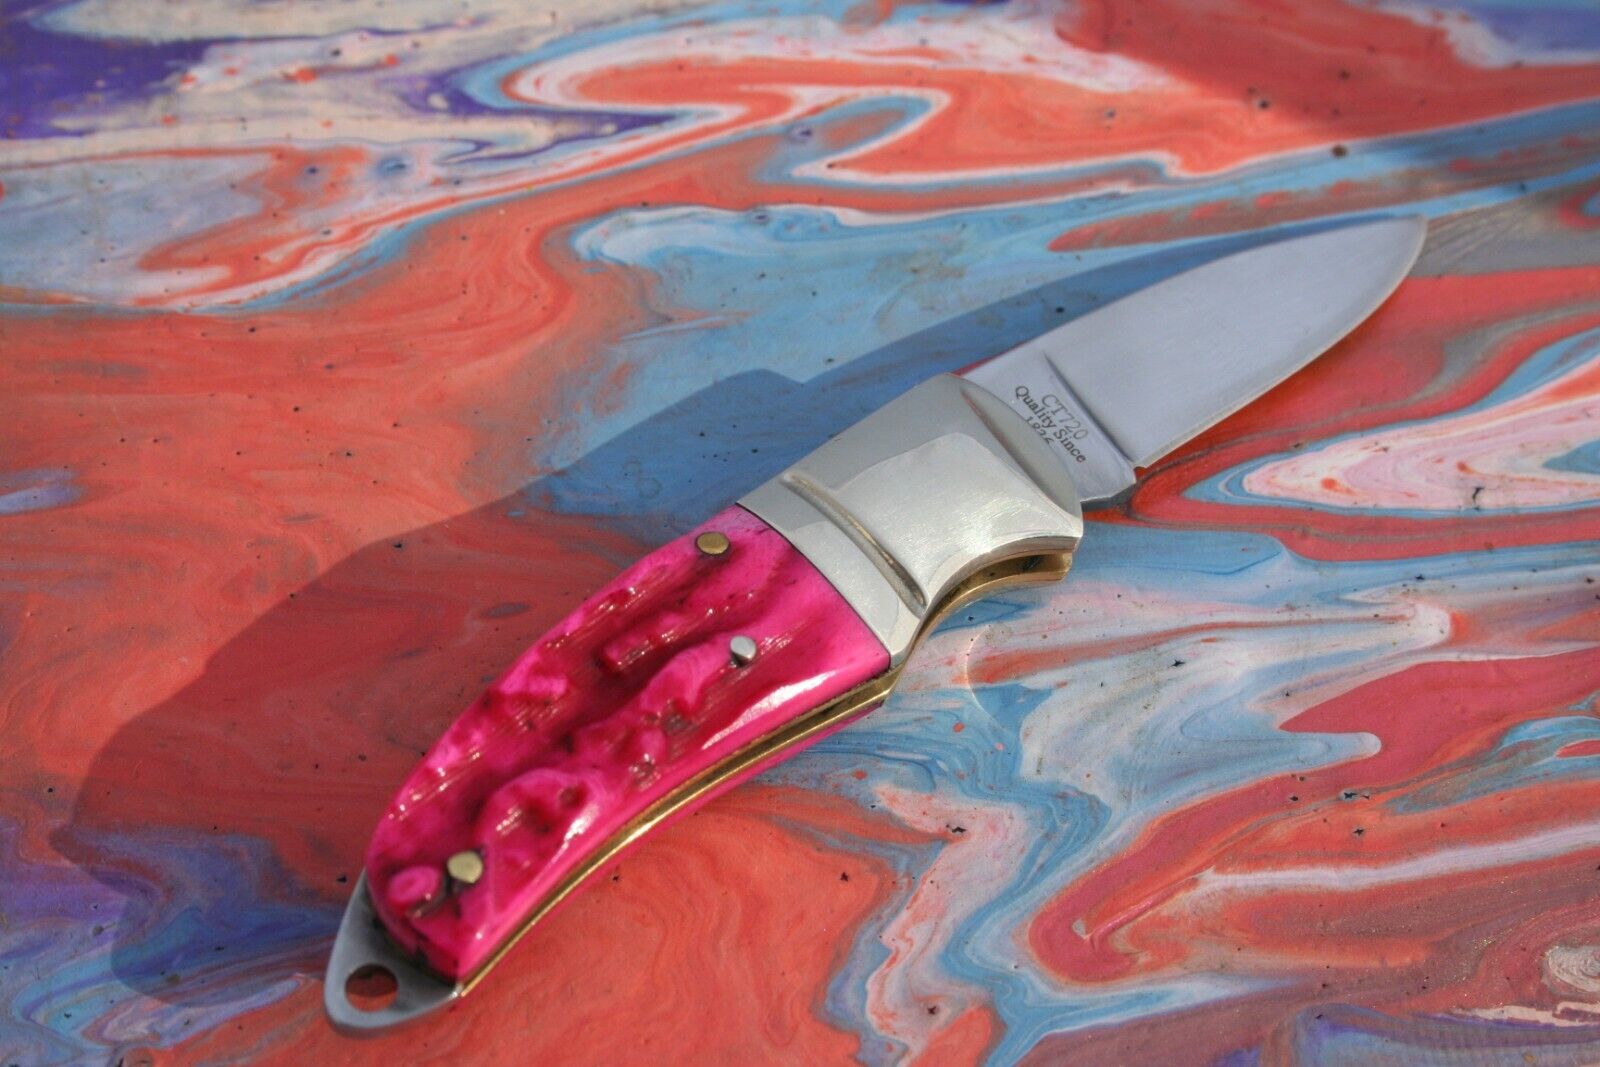 CT720 COLT PINK LADY KNIFE ORIGINAL BOX NEVER USED FOLDING RARE & DISCOUNTINUED